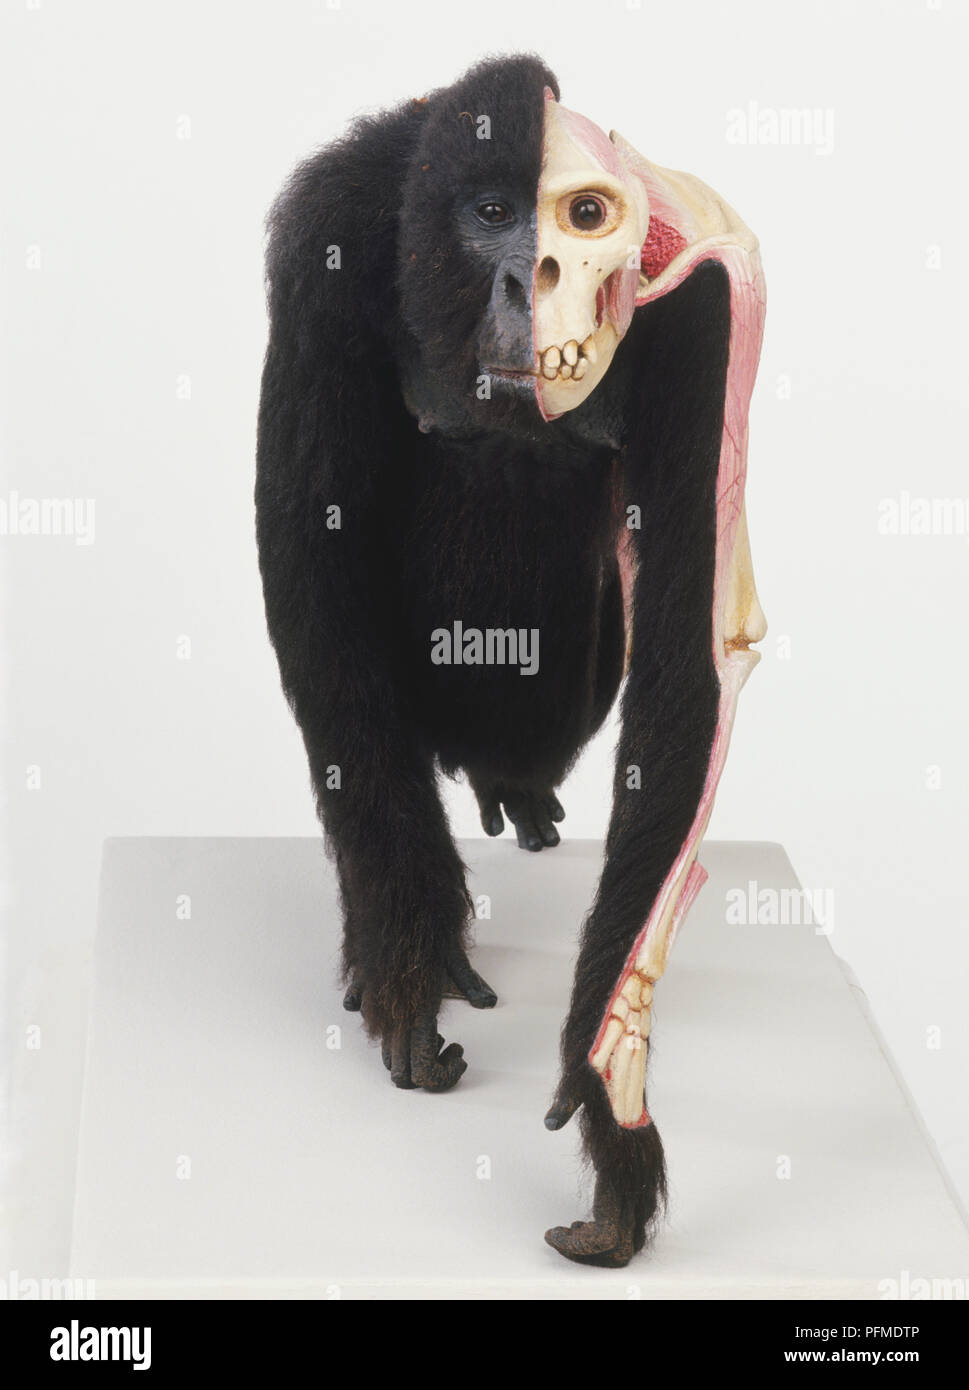 Cross-section model of front view of female Gorilla showing bone and muscle structure. Stock Photo